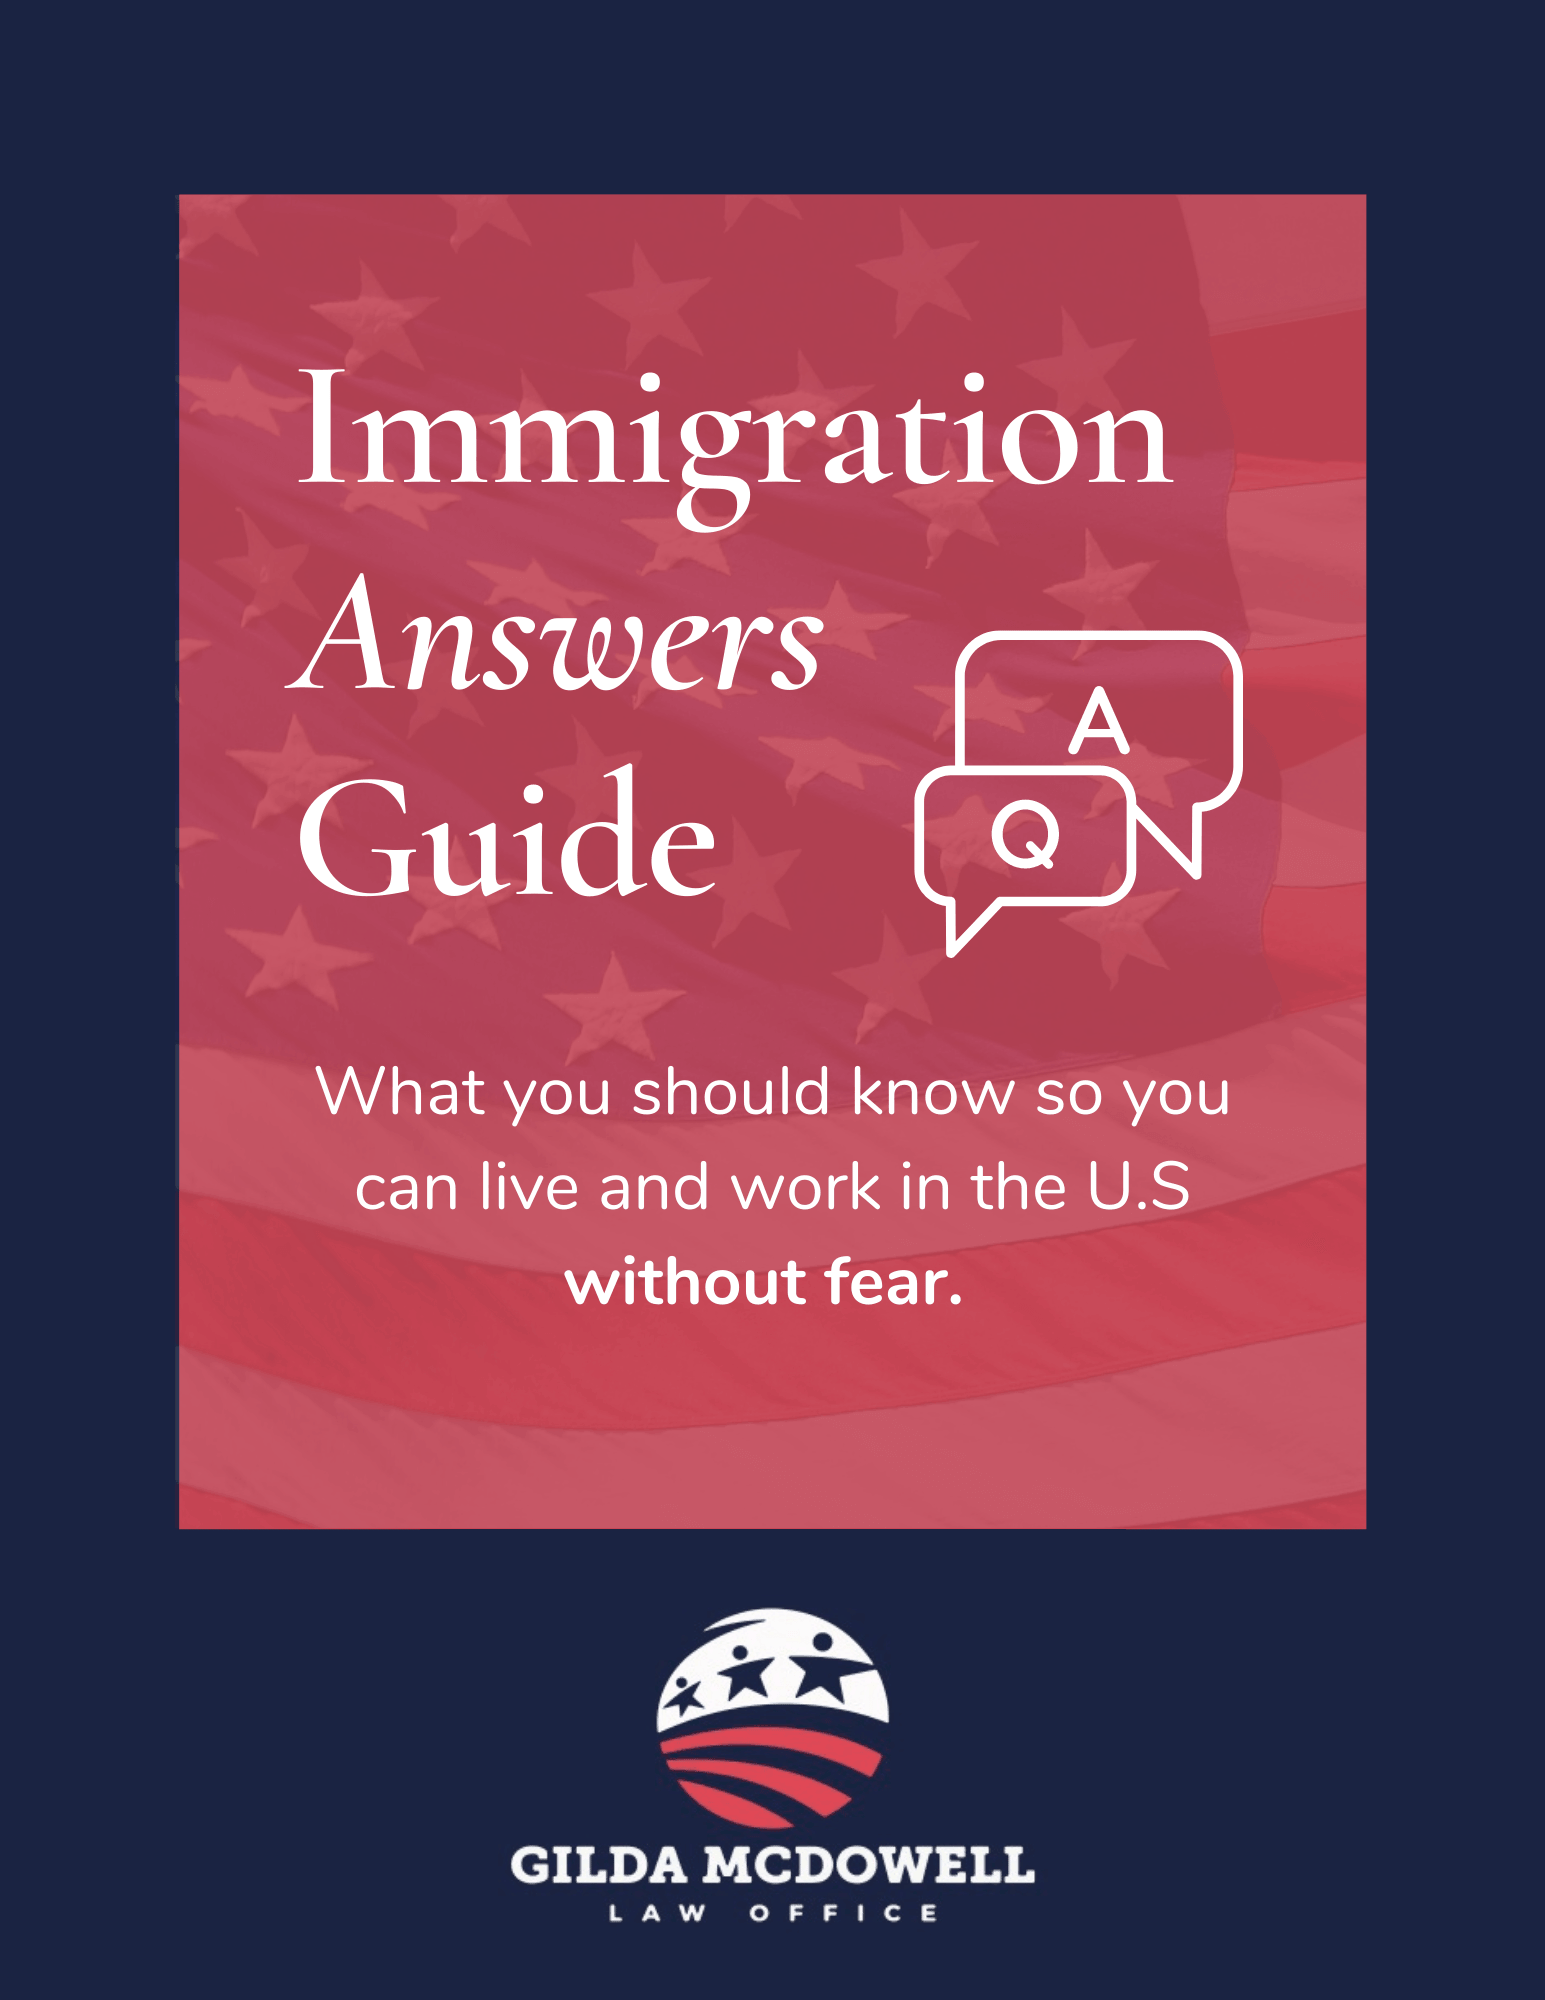 Lubbock Immigration Answers Guide